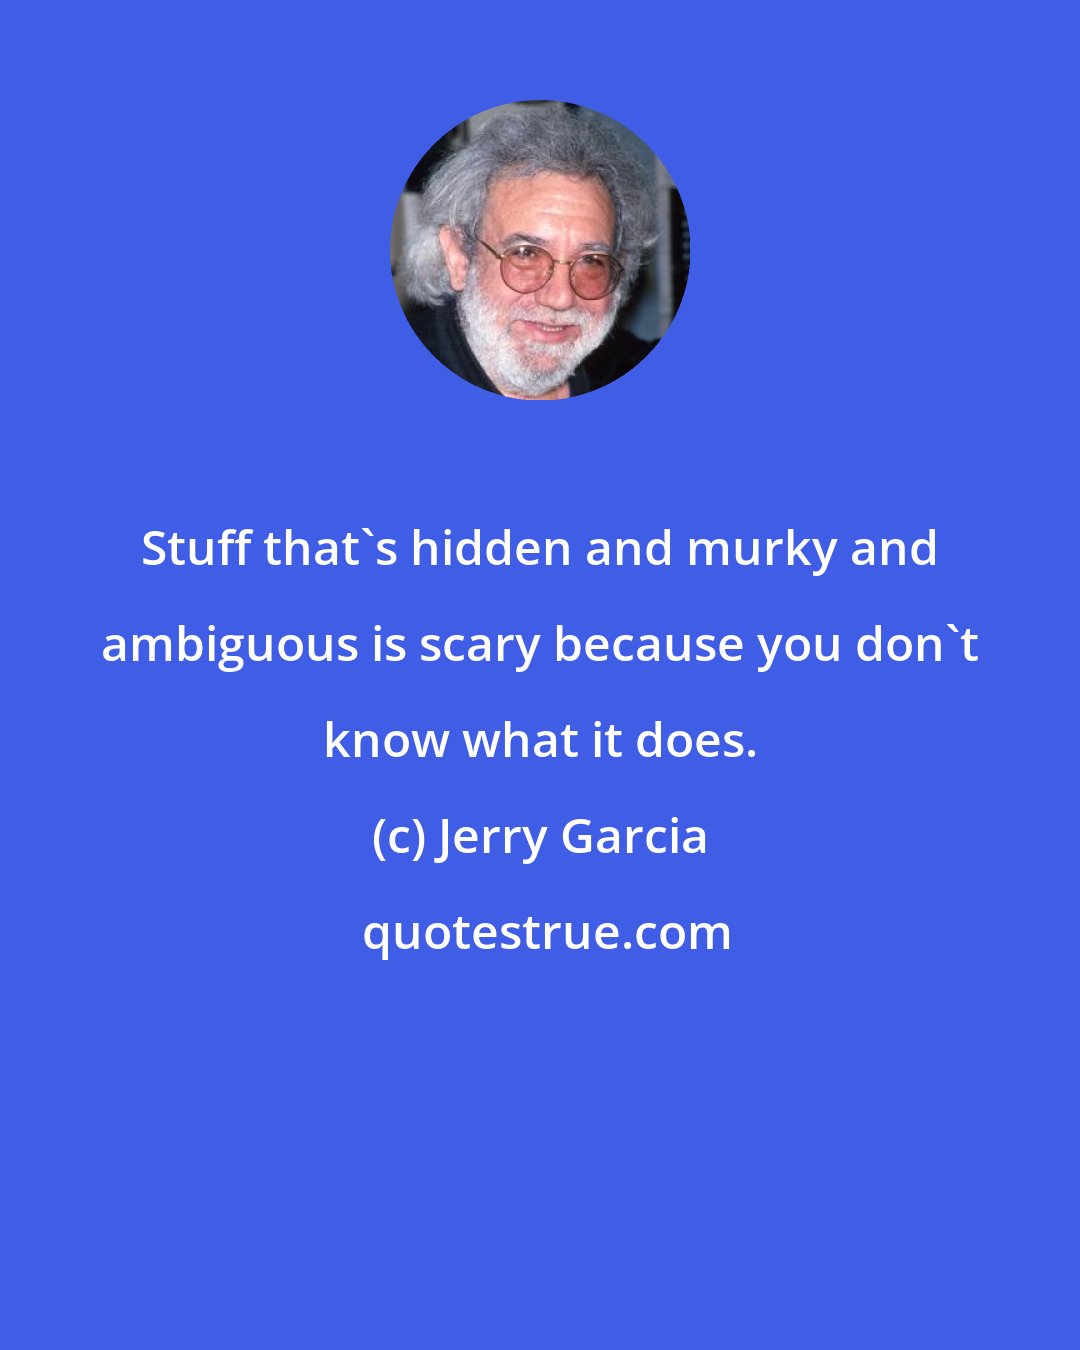 Jerry Garcia: Stuff that's hidden and murky and ambiguous is scary because you don't know what it does.